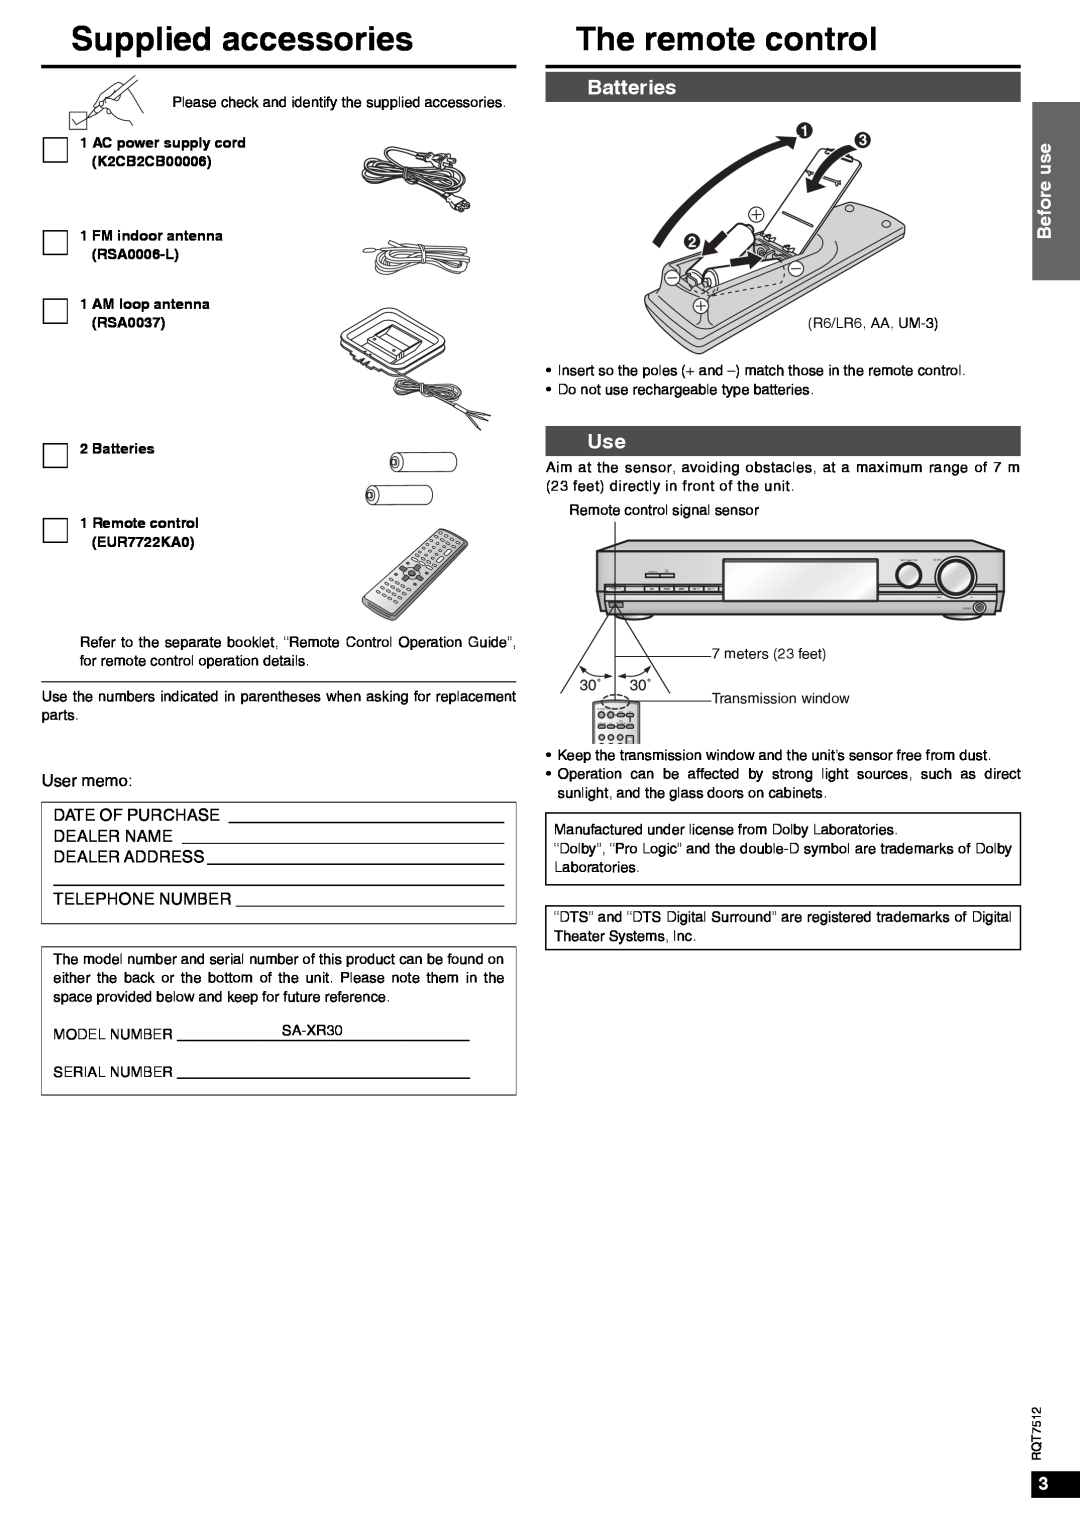 Panasonic SA-XR30 important safety instructions Supplied accessories, The remote control, Batteries, Before use 